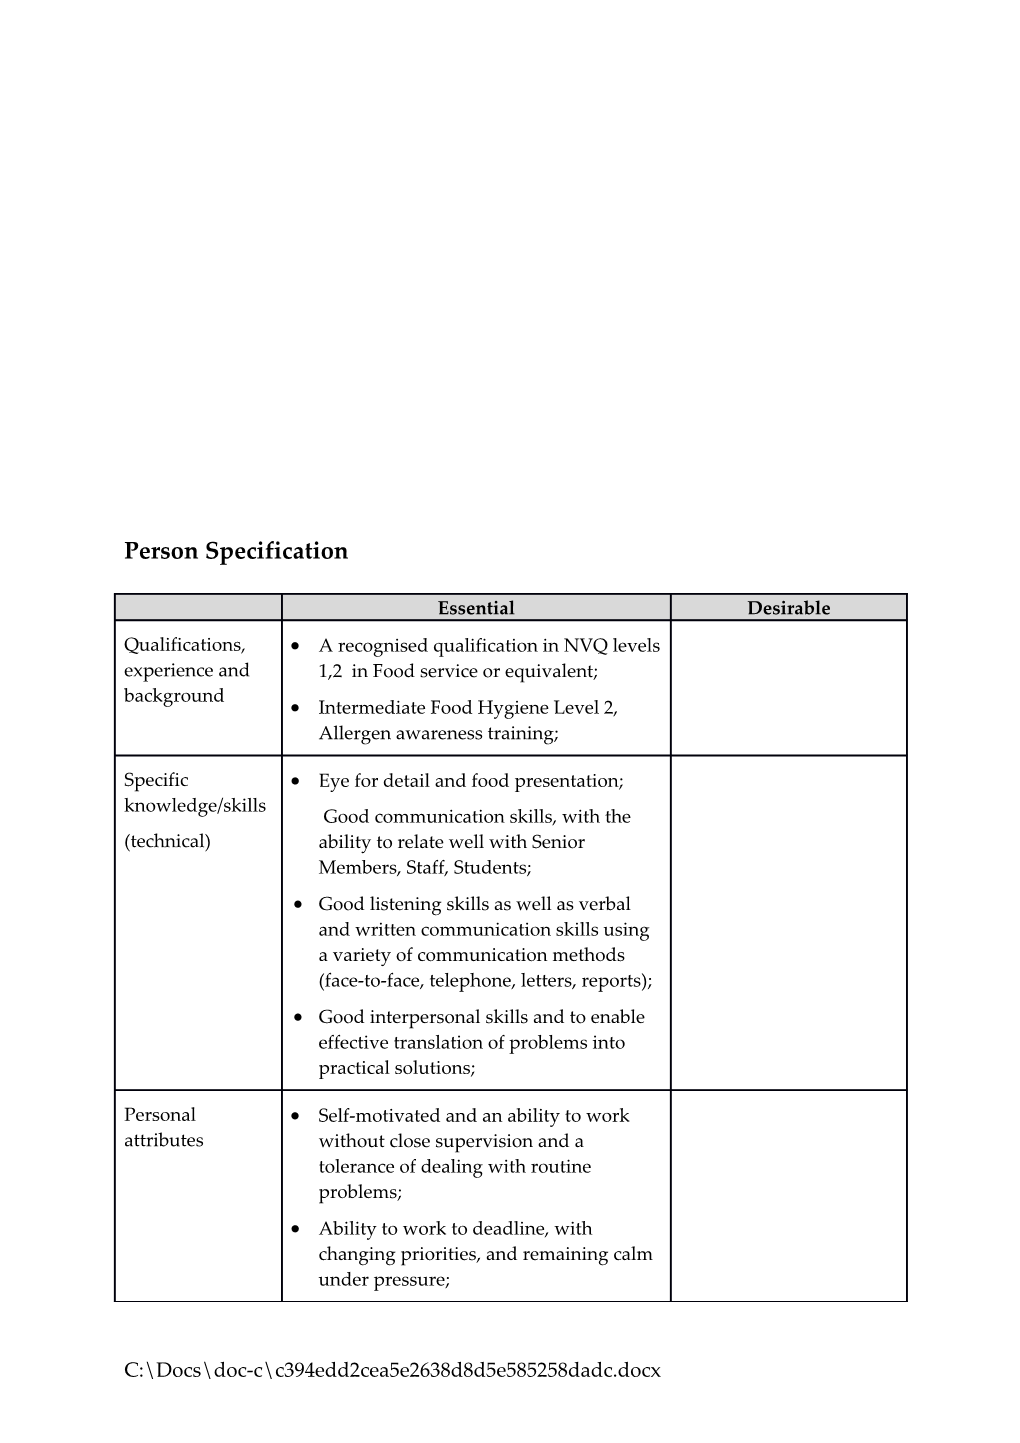 Organising & Planning of Daily Worksheets & Tasks for Waiting Staff;